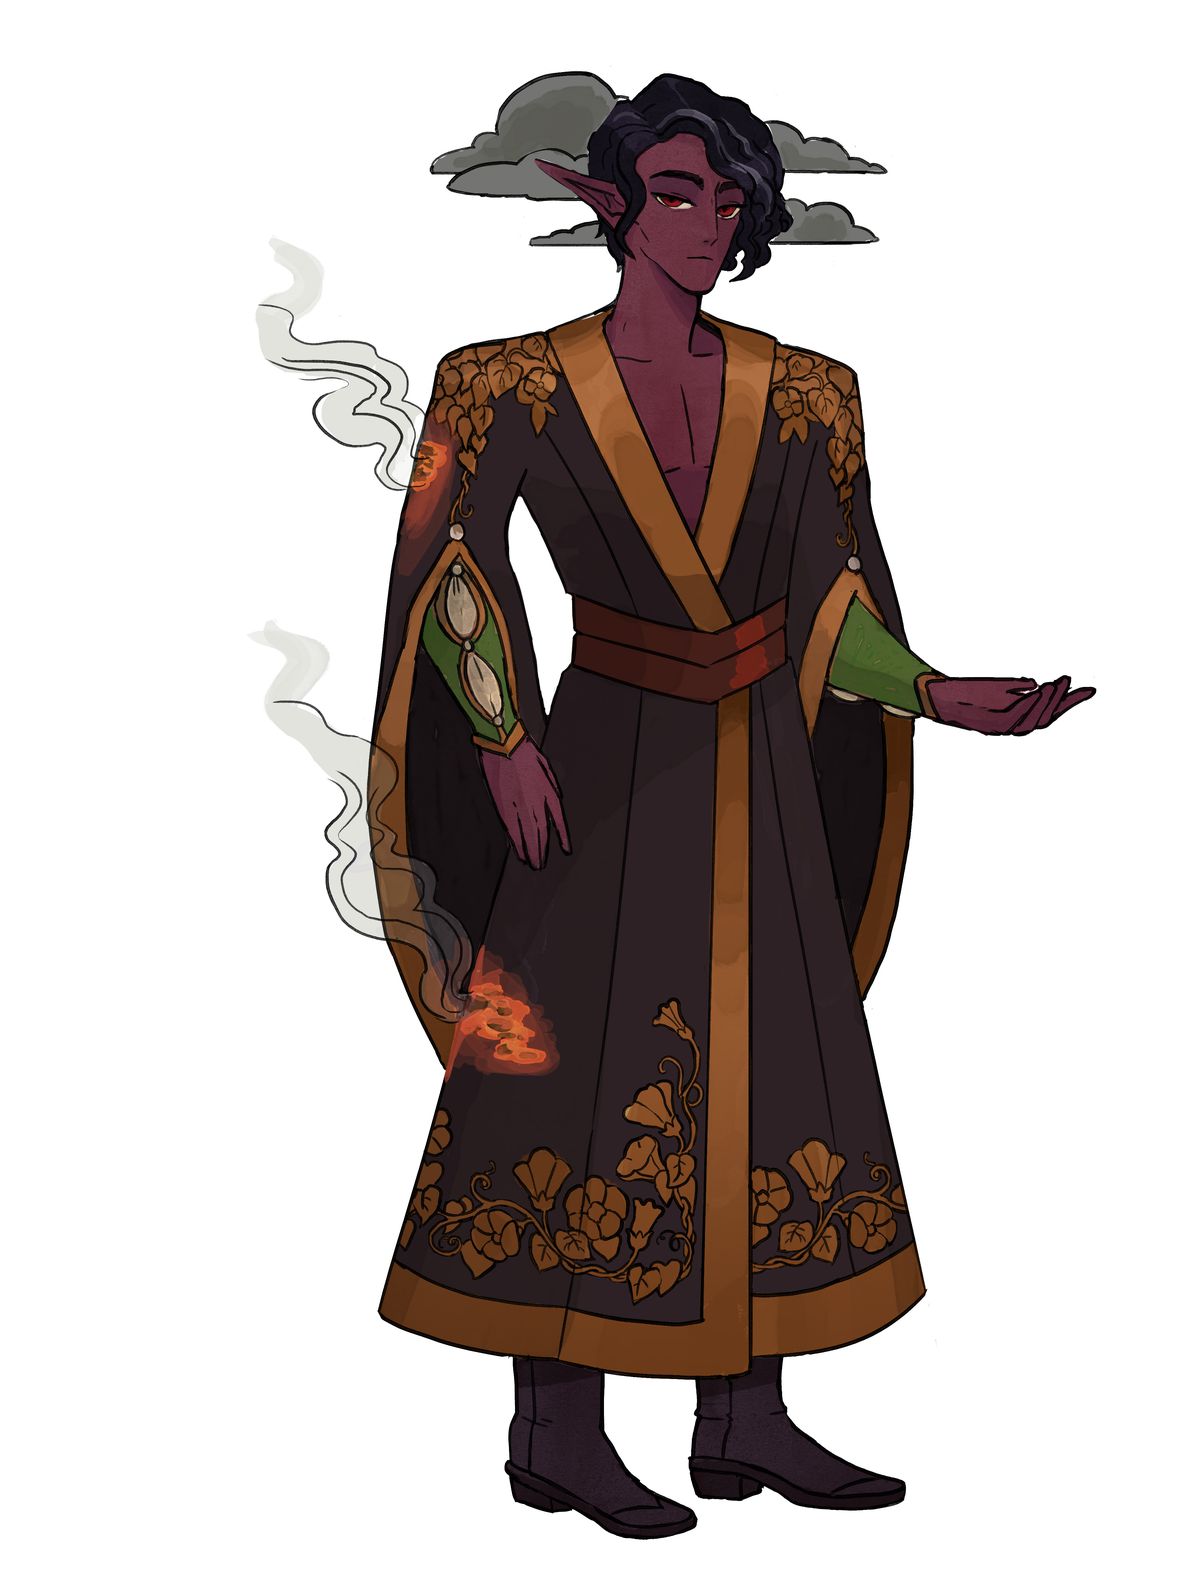 A purple-skinned man with dark hair, his robes open to the waist. He is smoldering — literally on fire in places.